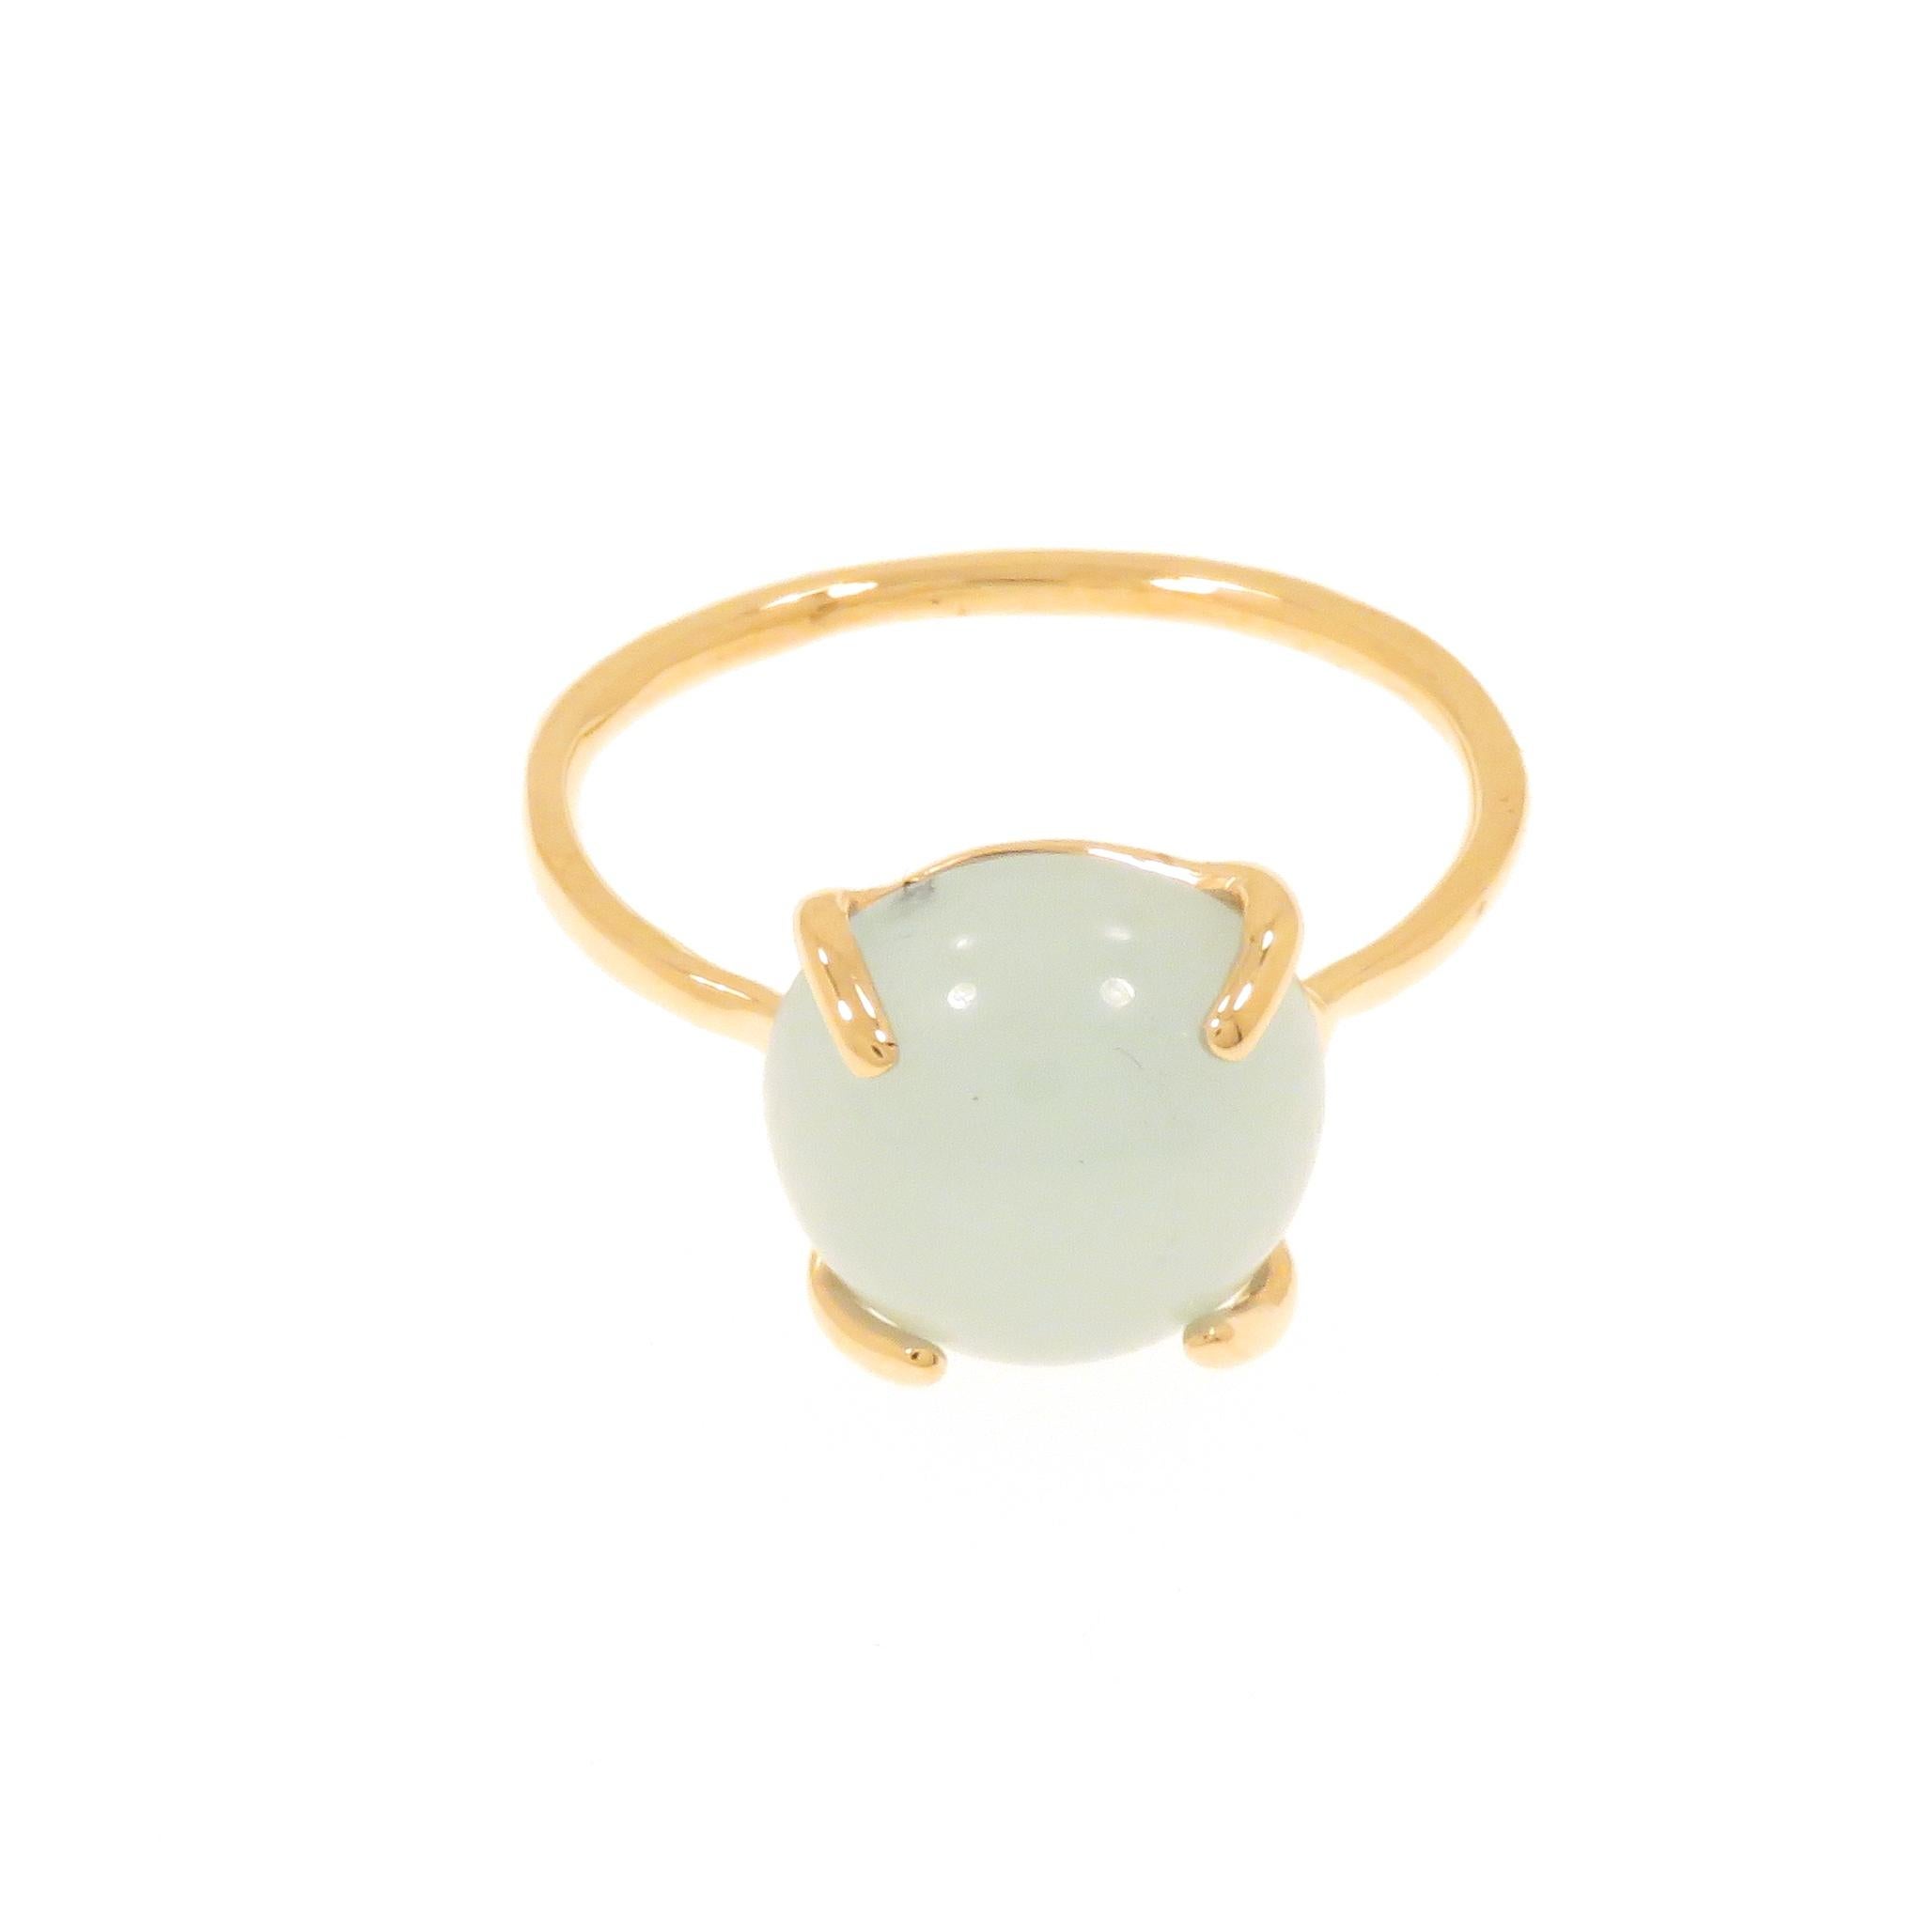 Cabochon cut aquamarine featured in a contemporary ring crafted in 9 karat rose gold. The size of the gemstone is 10x10 mm / 0.393x0.393 inches. US finger size is 6 , French size 52, Italian size 12, resizable to the customer's size before shipment.